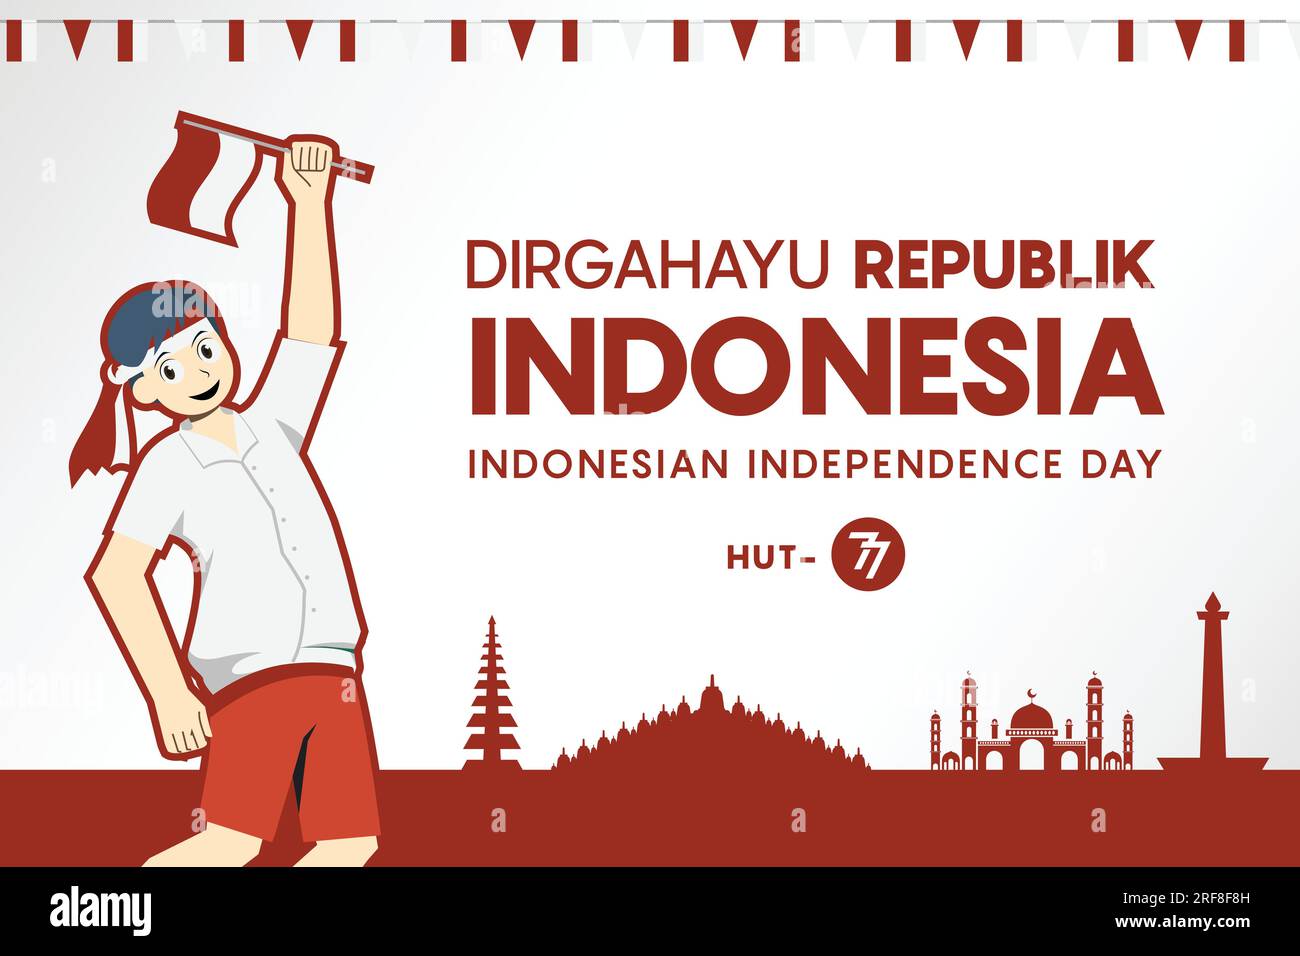 Indonesian independence day template Stock Vector